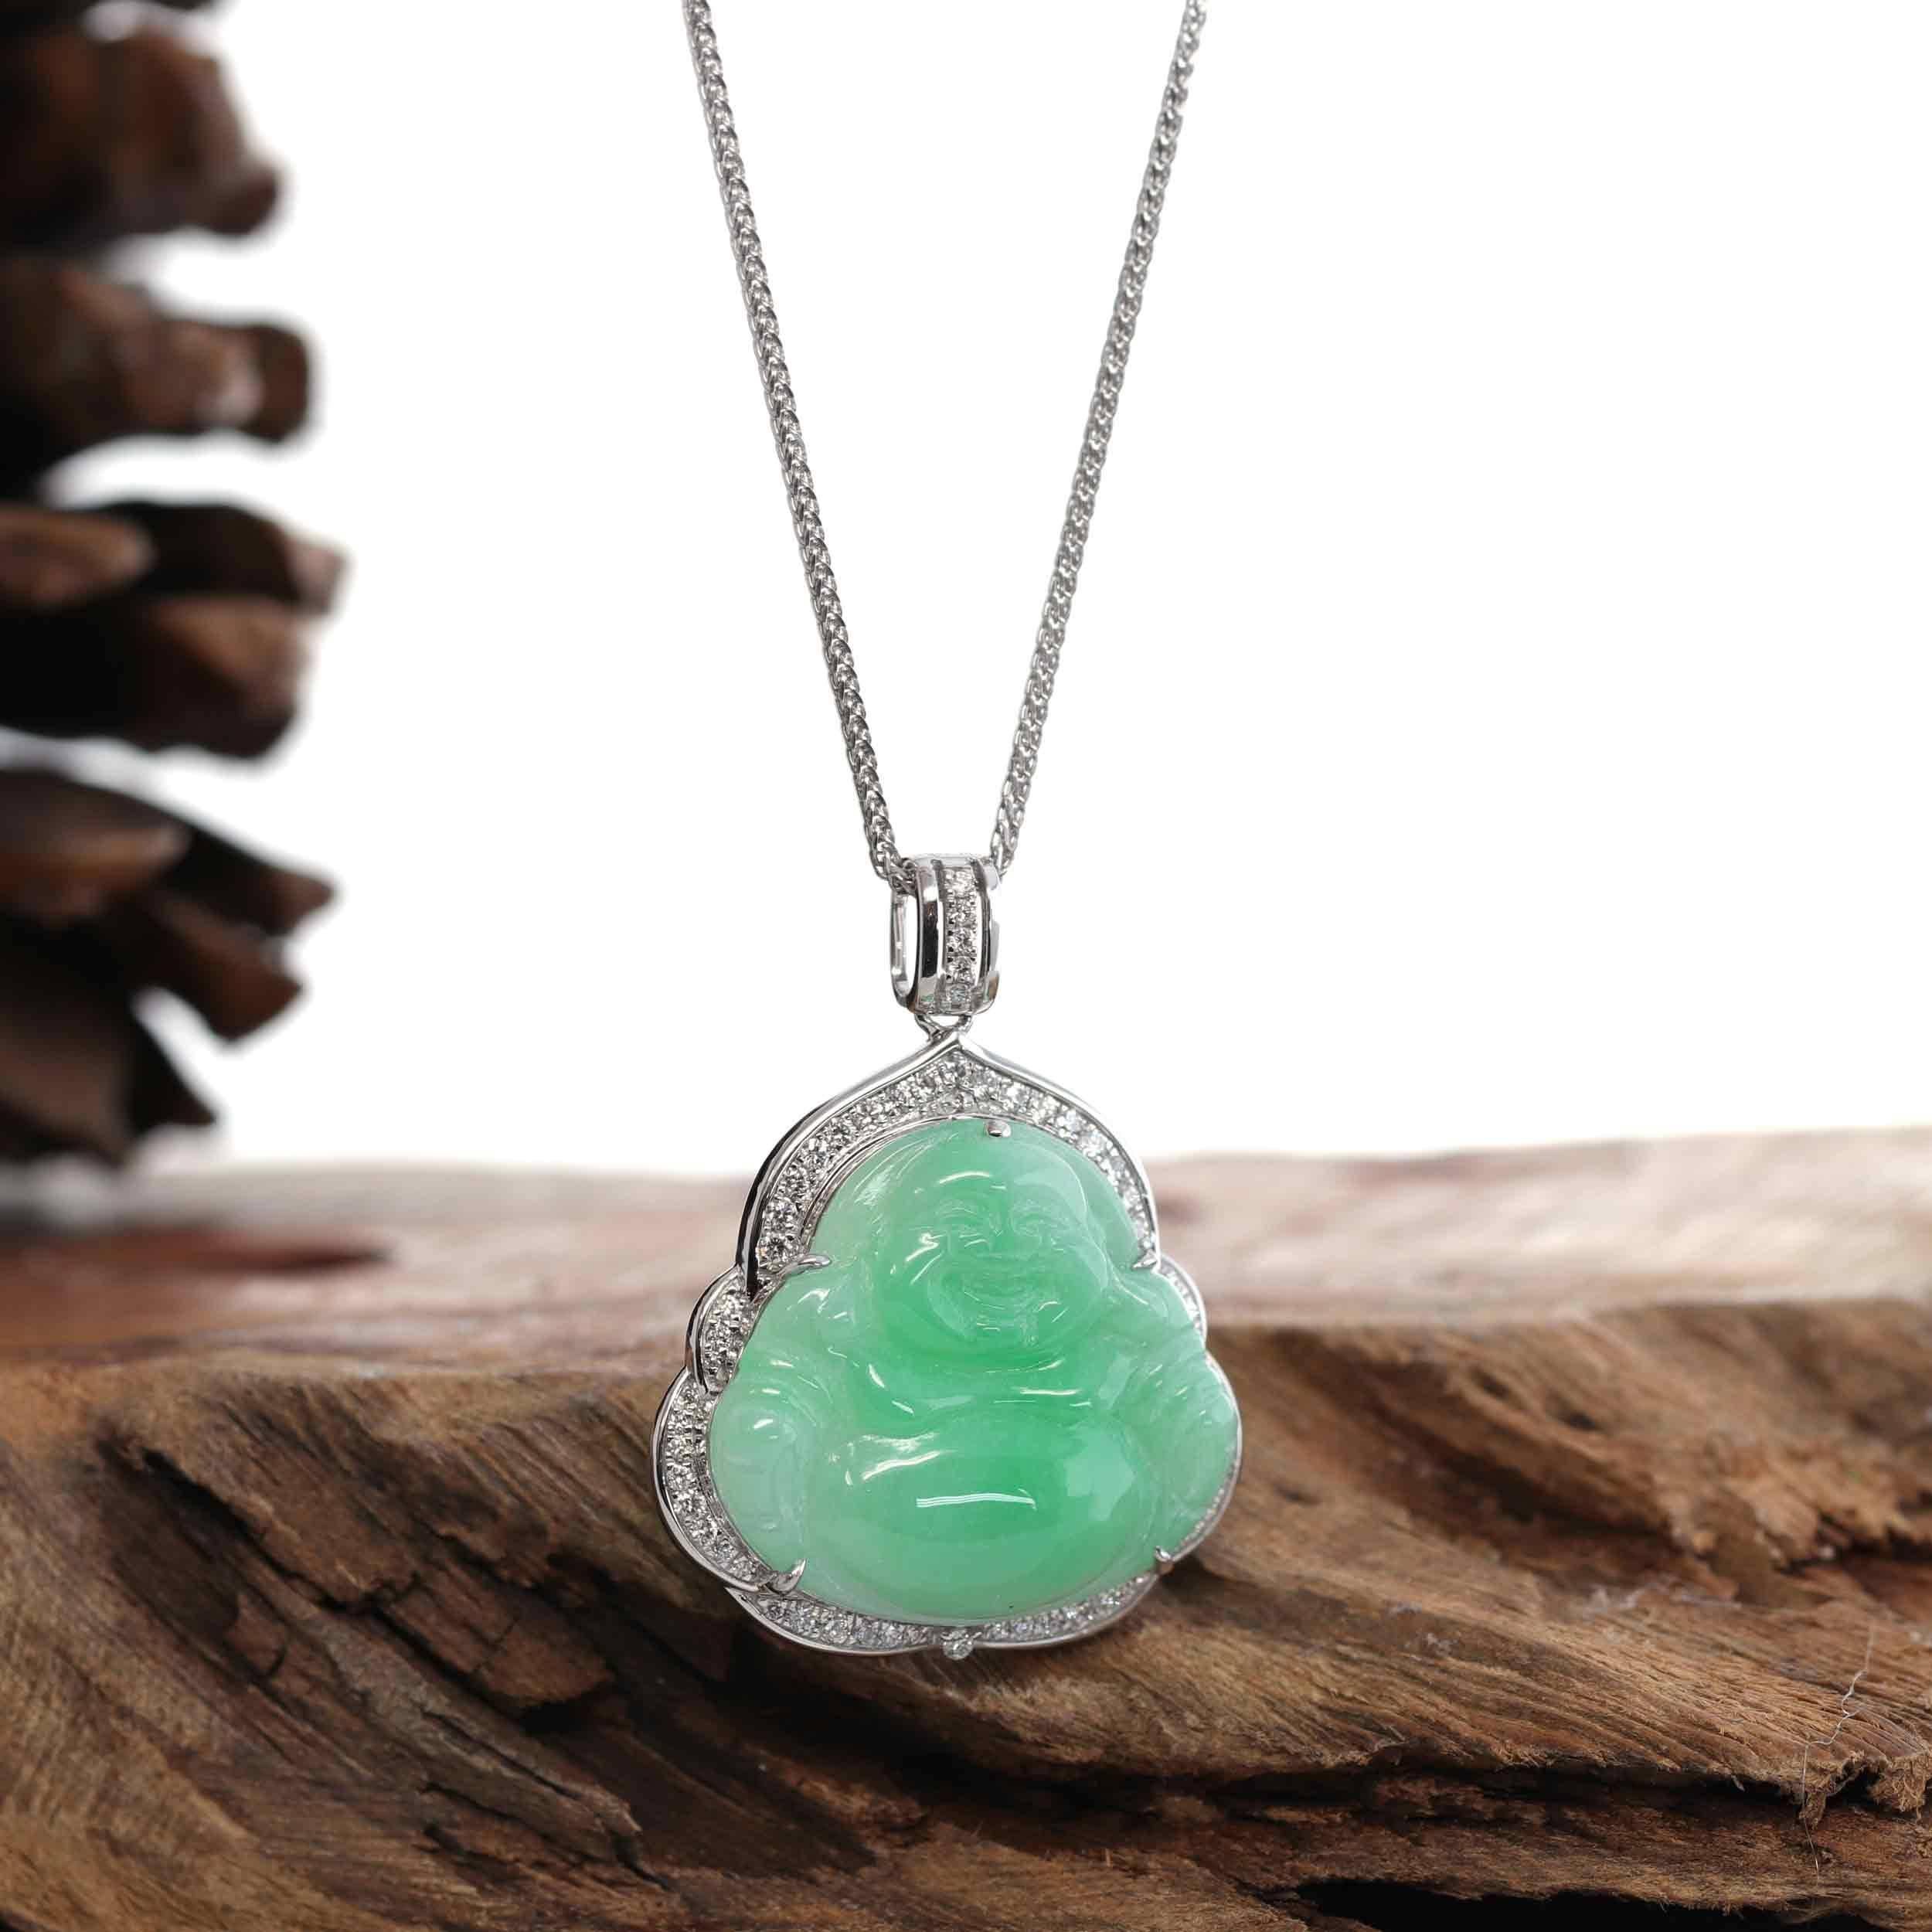 * INTRODUCTION---14k White Gold & Genuine Green Jadeite Jade Buddha Pendant Necklace With VS1 Diamonds halo. The person who wears a Happy Buddha pendant around the neck attracts positive energy. They emit positive waves into the environment around